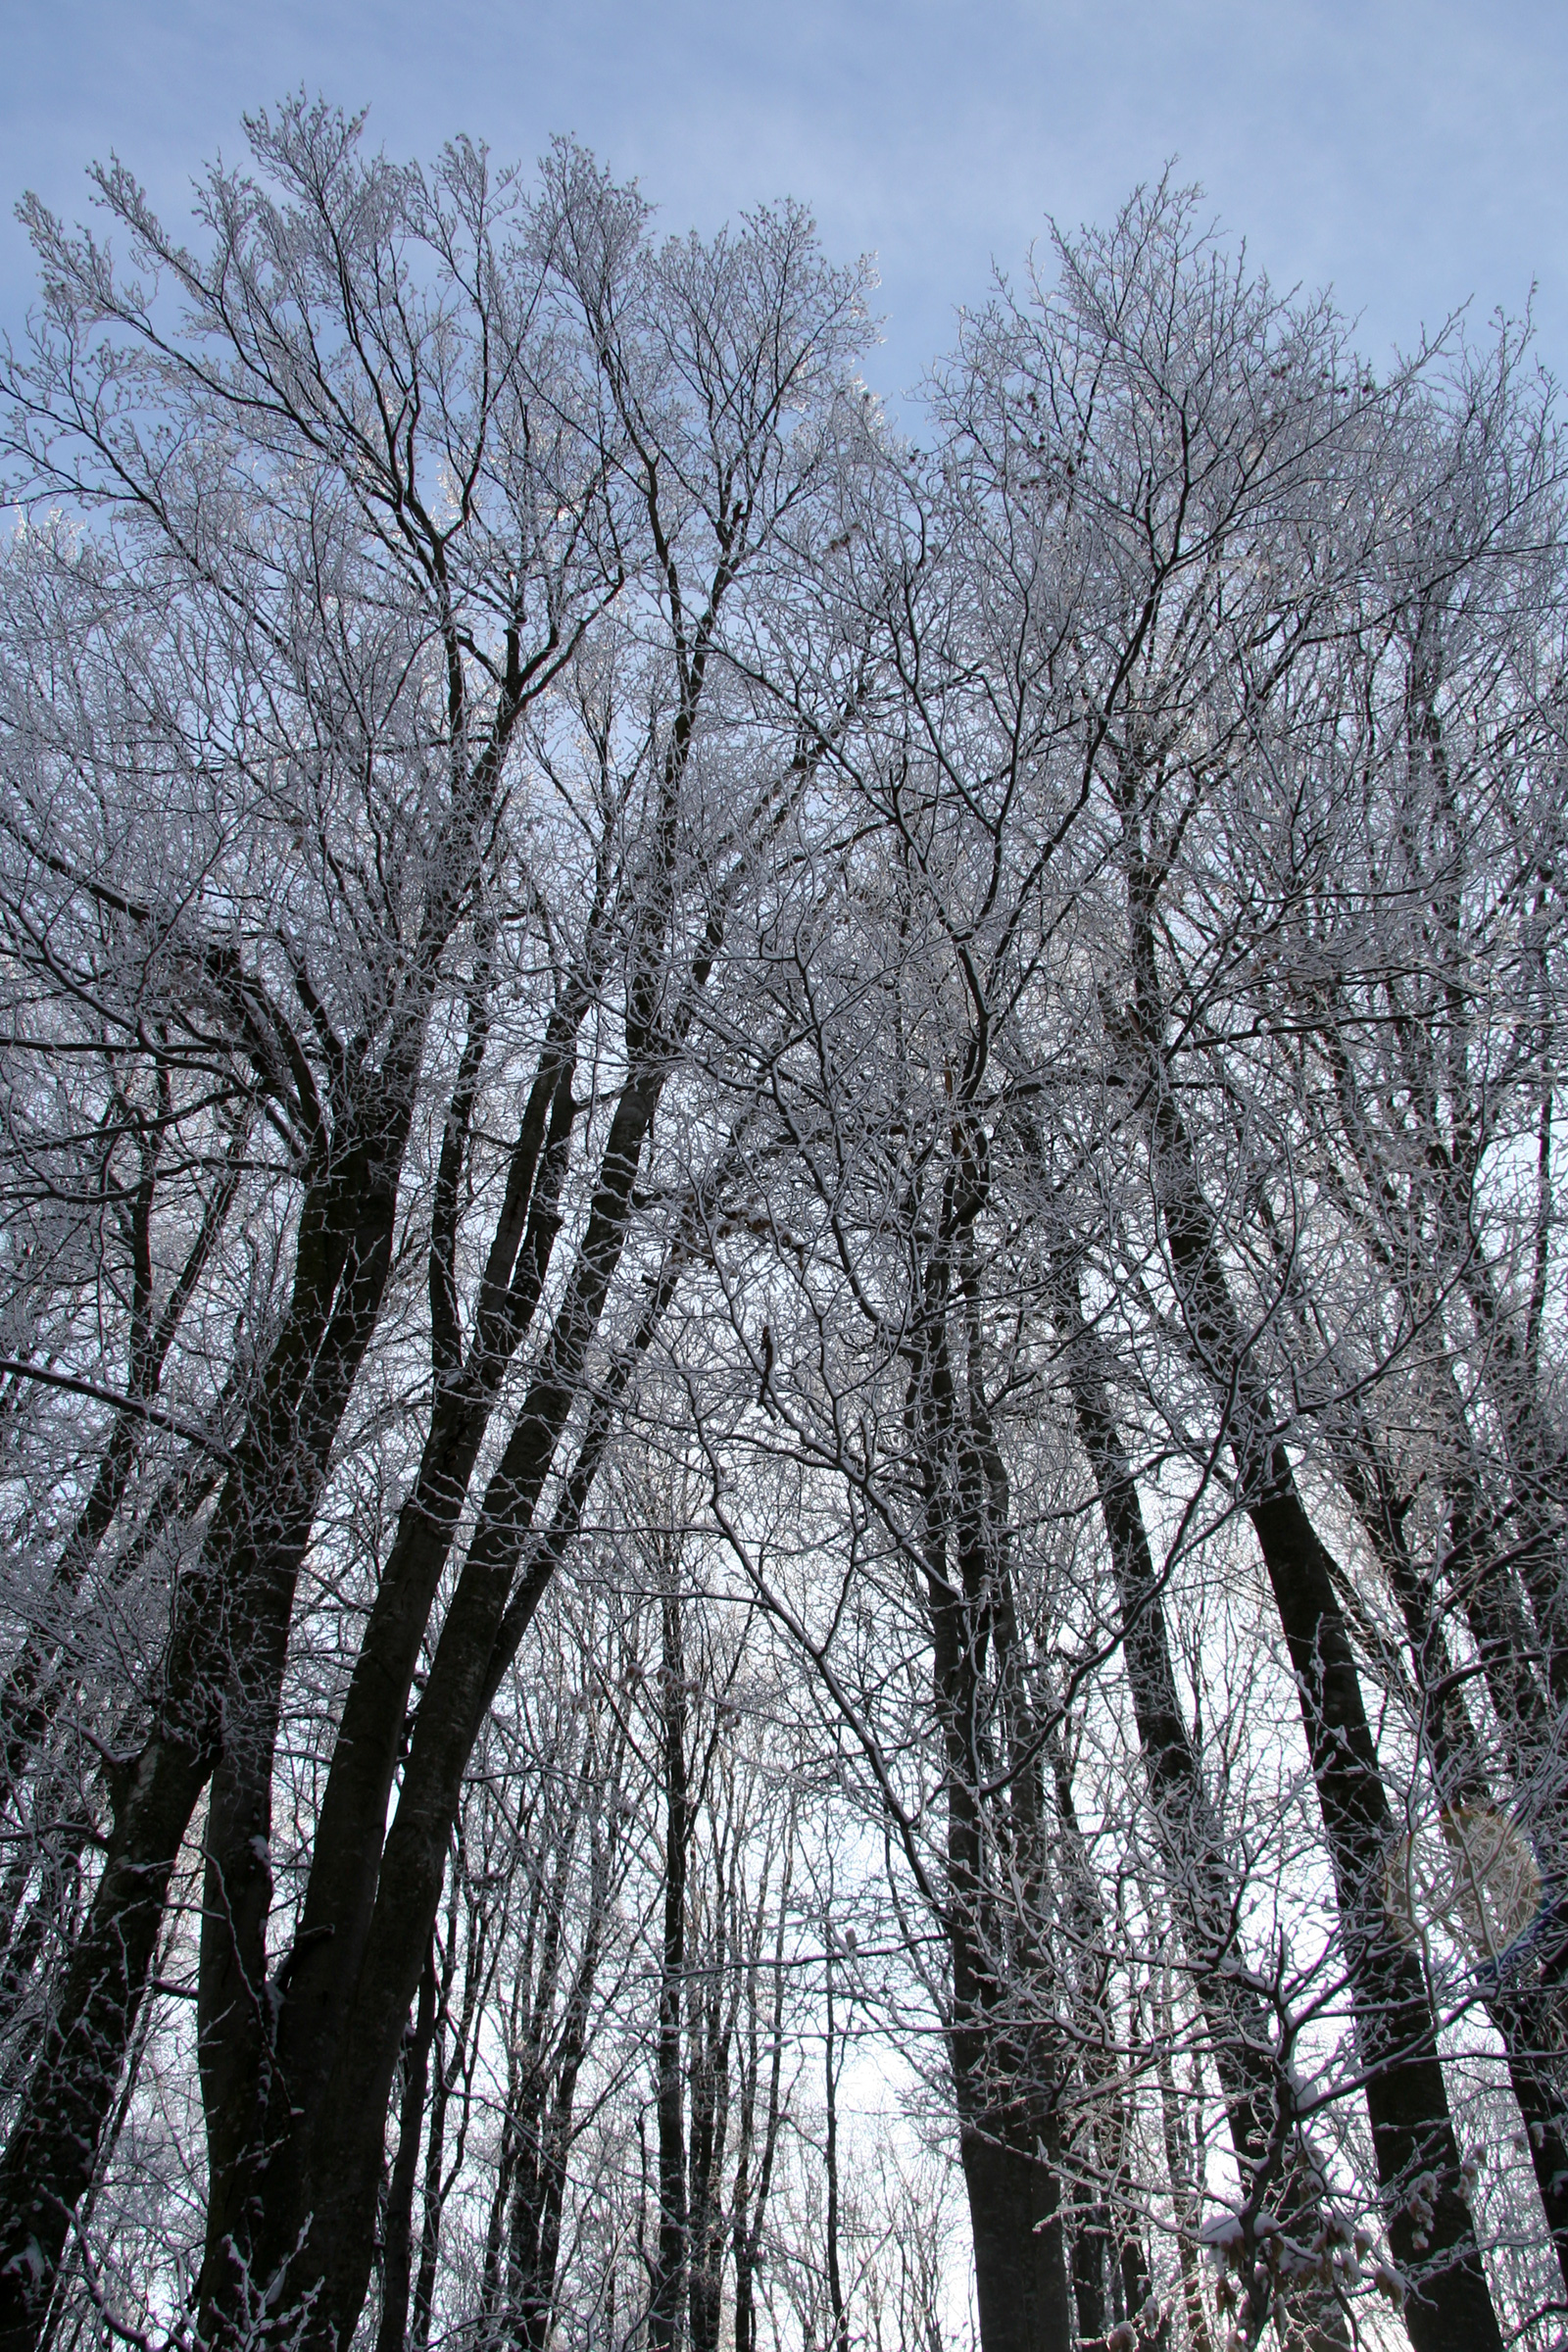 Trees covered in hoarfrost after a chilly night